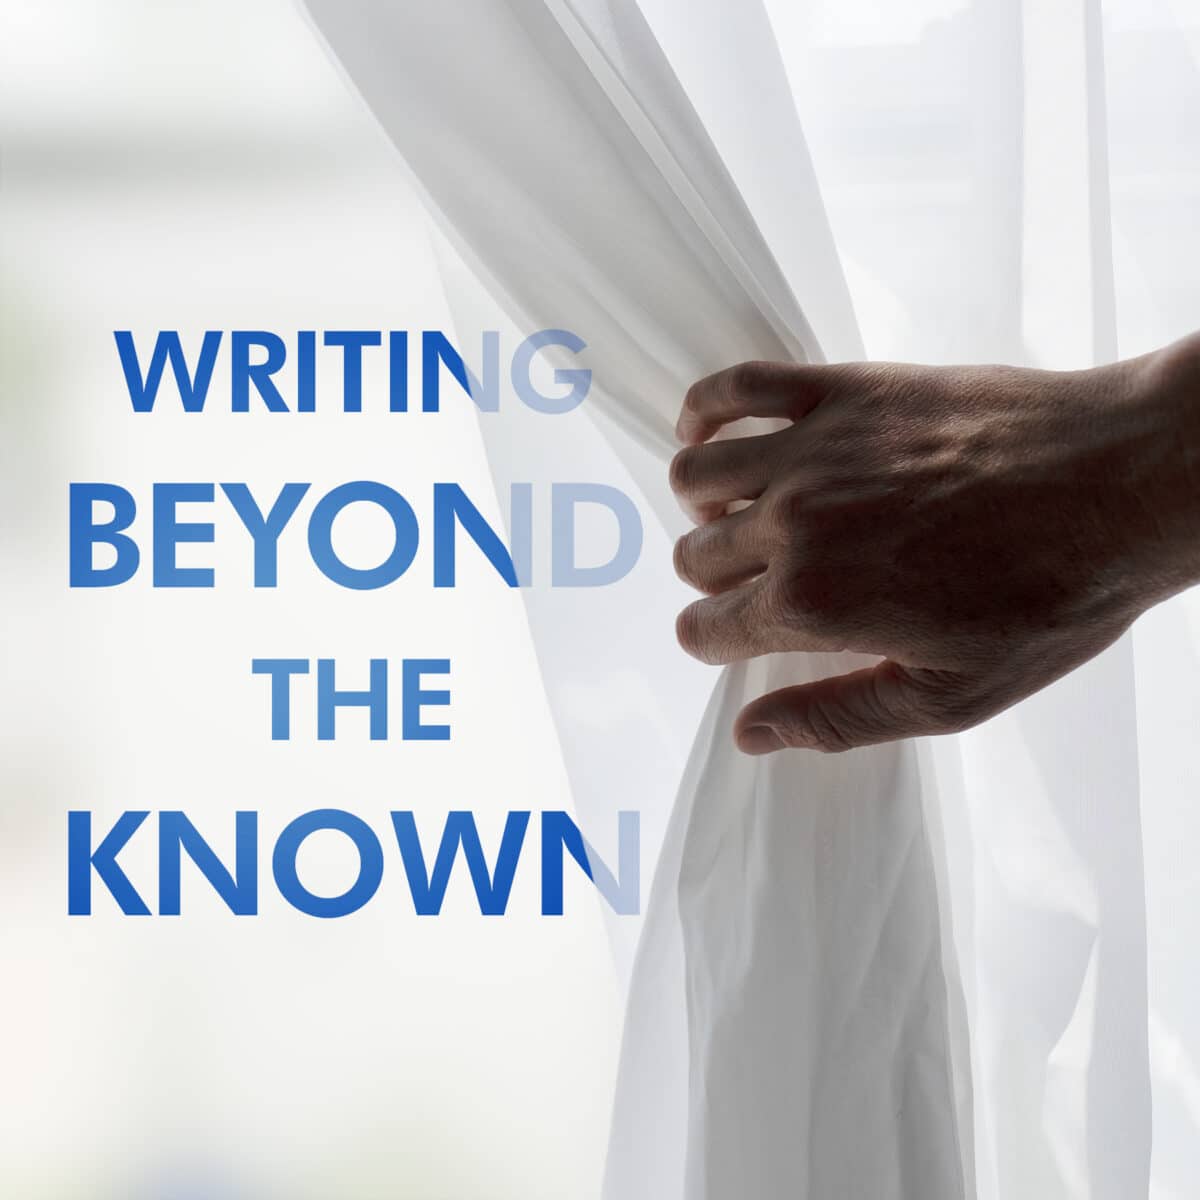 Writing beyond the known